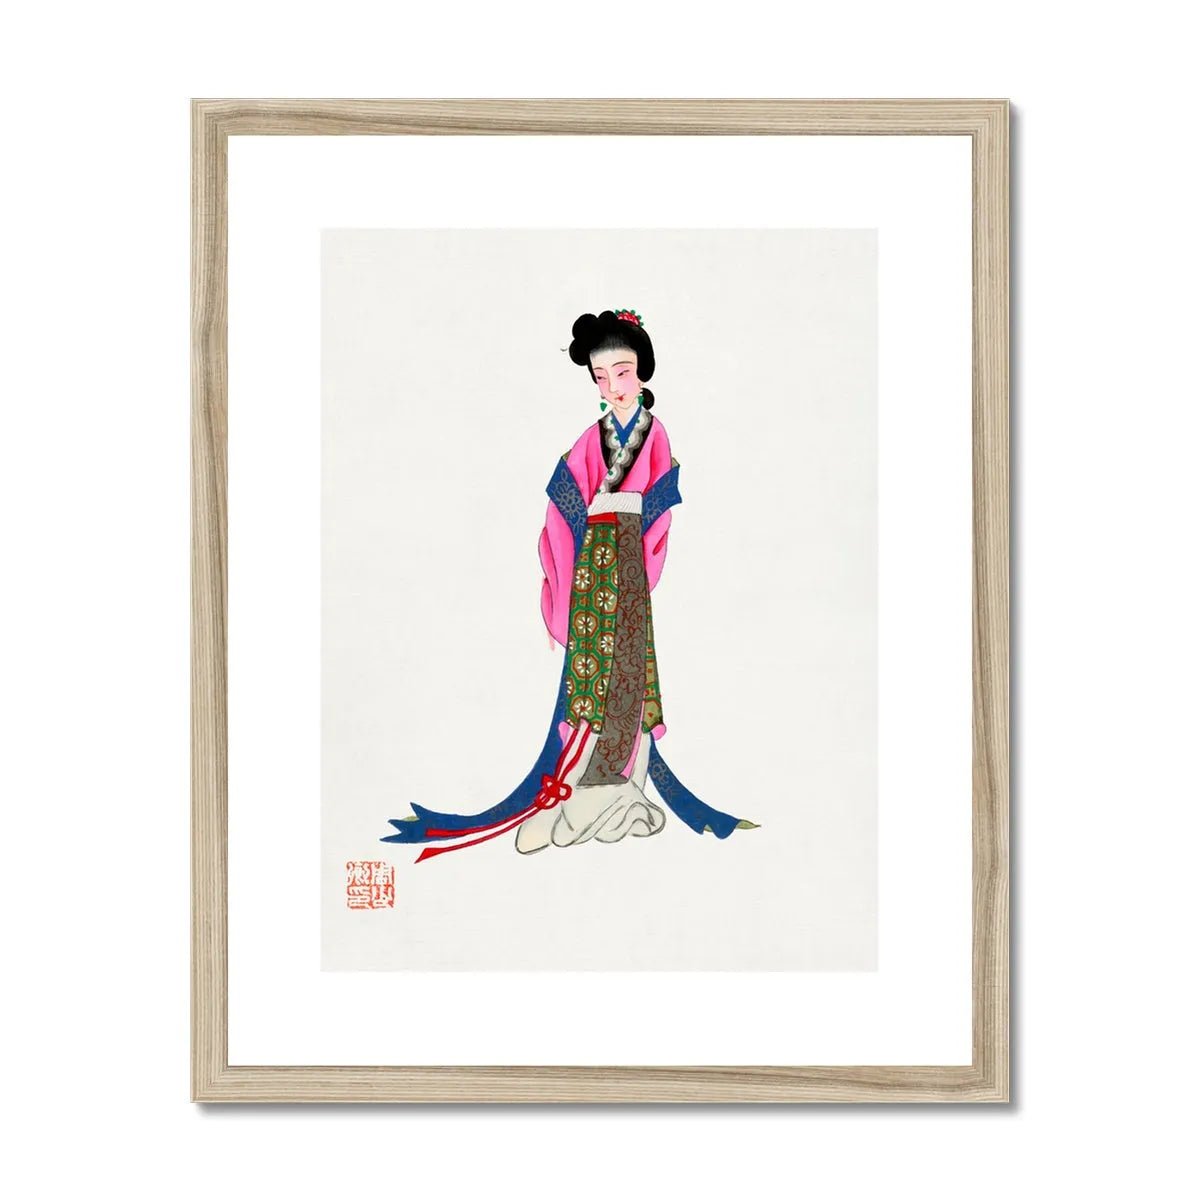 Chinese Noblewoman Framed & Mounted Print - 16’x20’ / Natural Frame - Posters Prints & Visual Artwork - Aesthetic Art